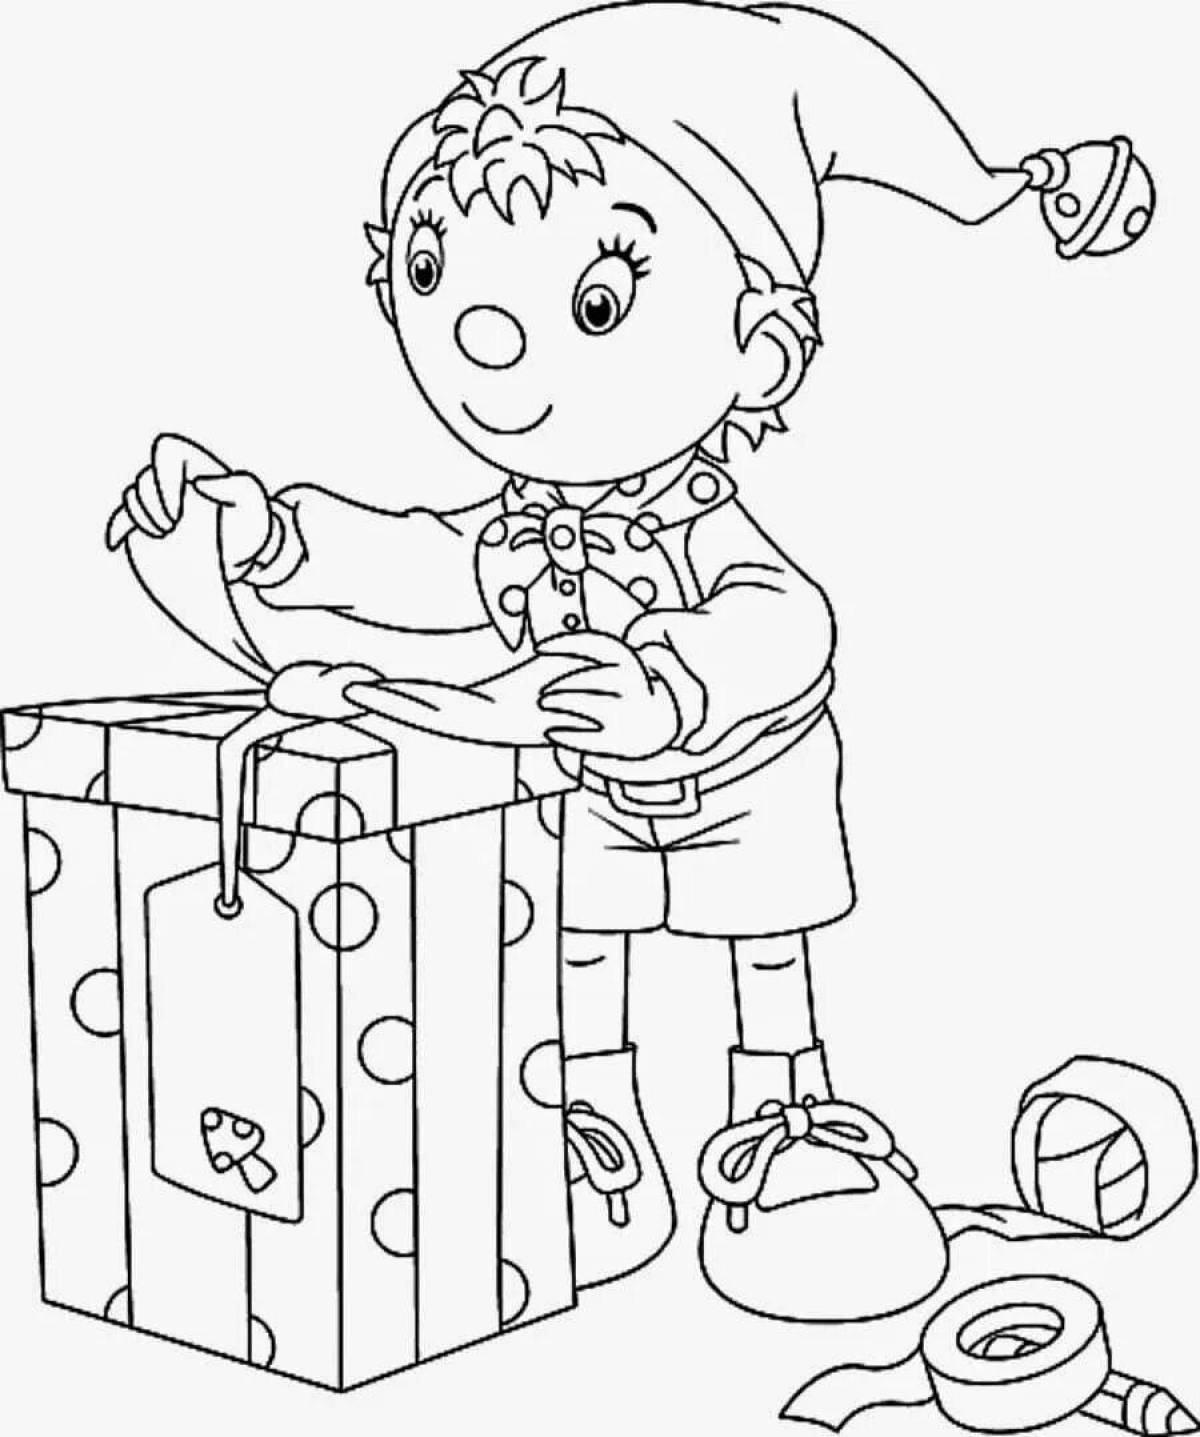 Fancy Toy Factory Coloring Page